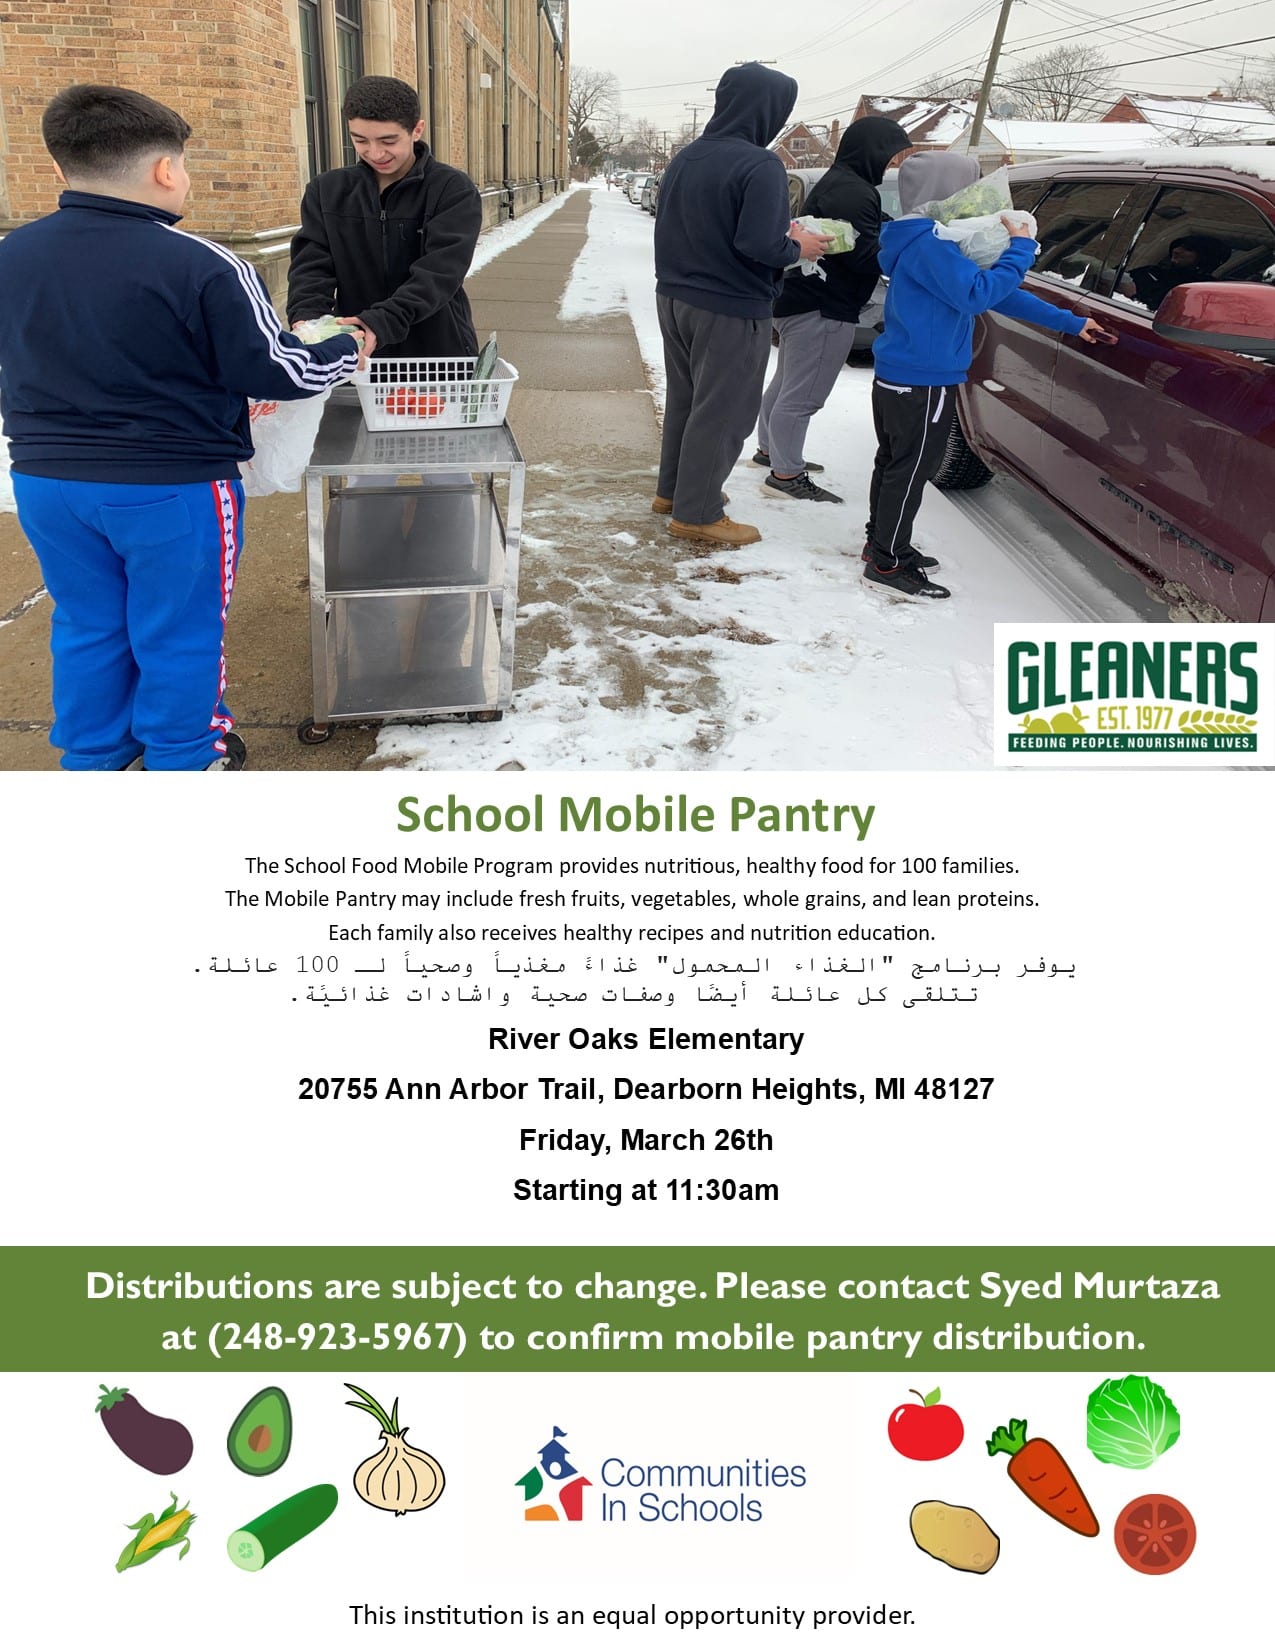 A flyer to where mobile pantry is being passed out to families in cars.